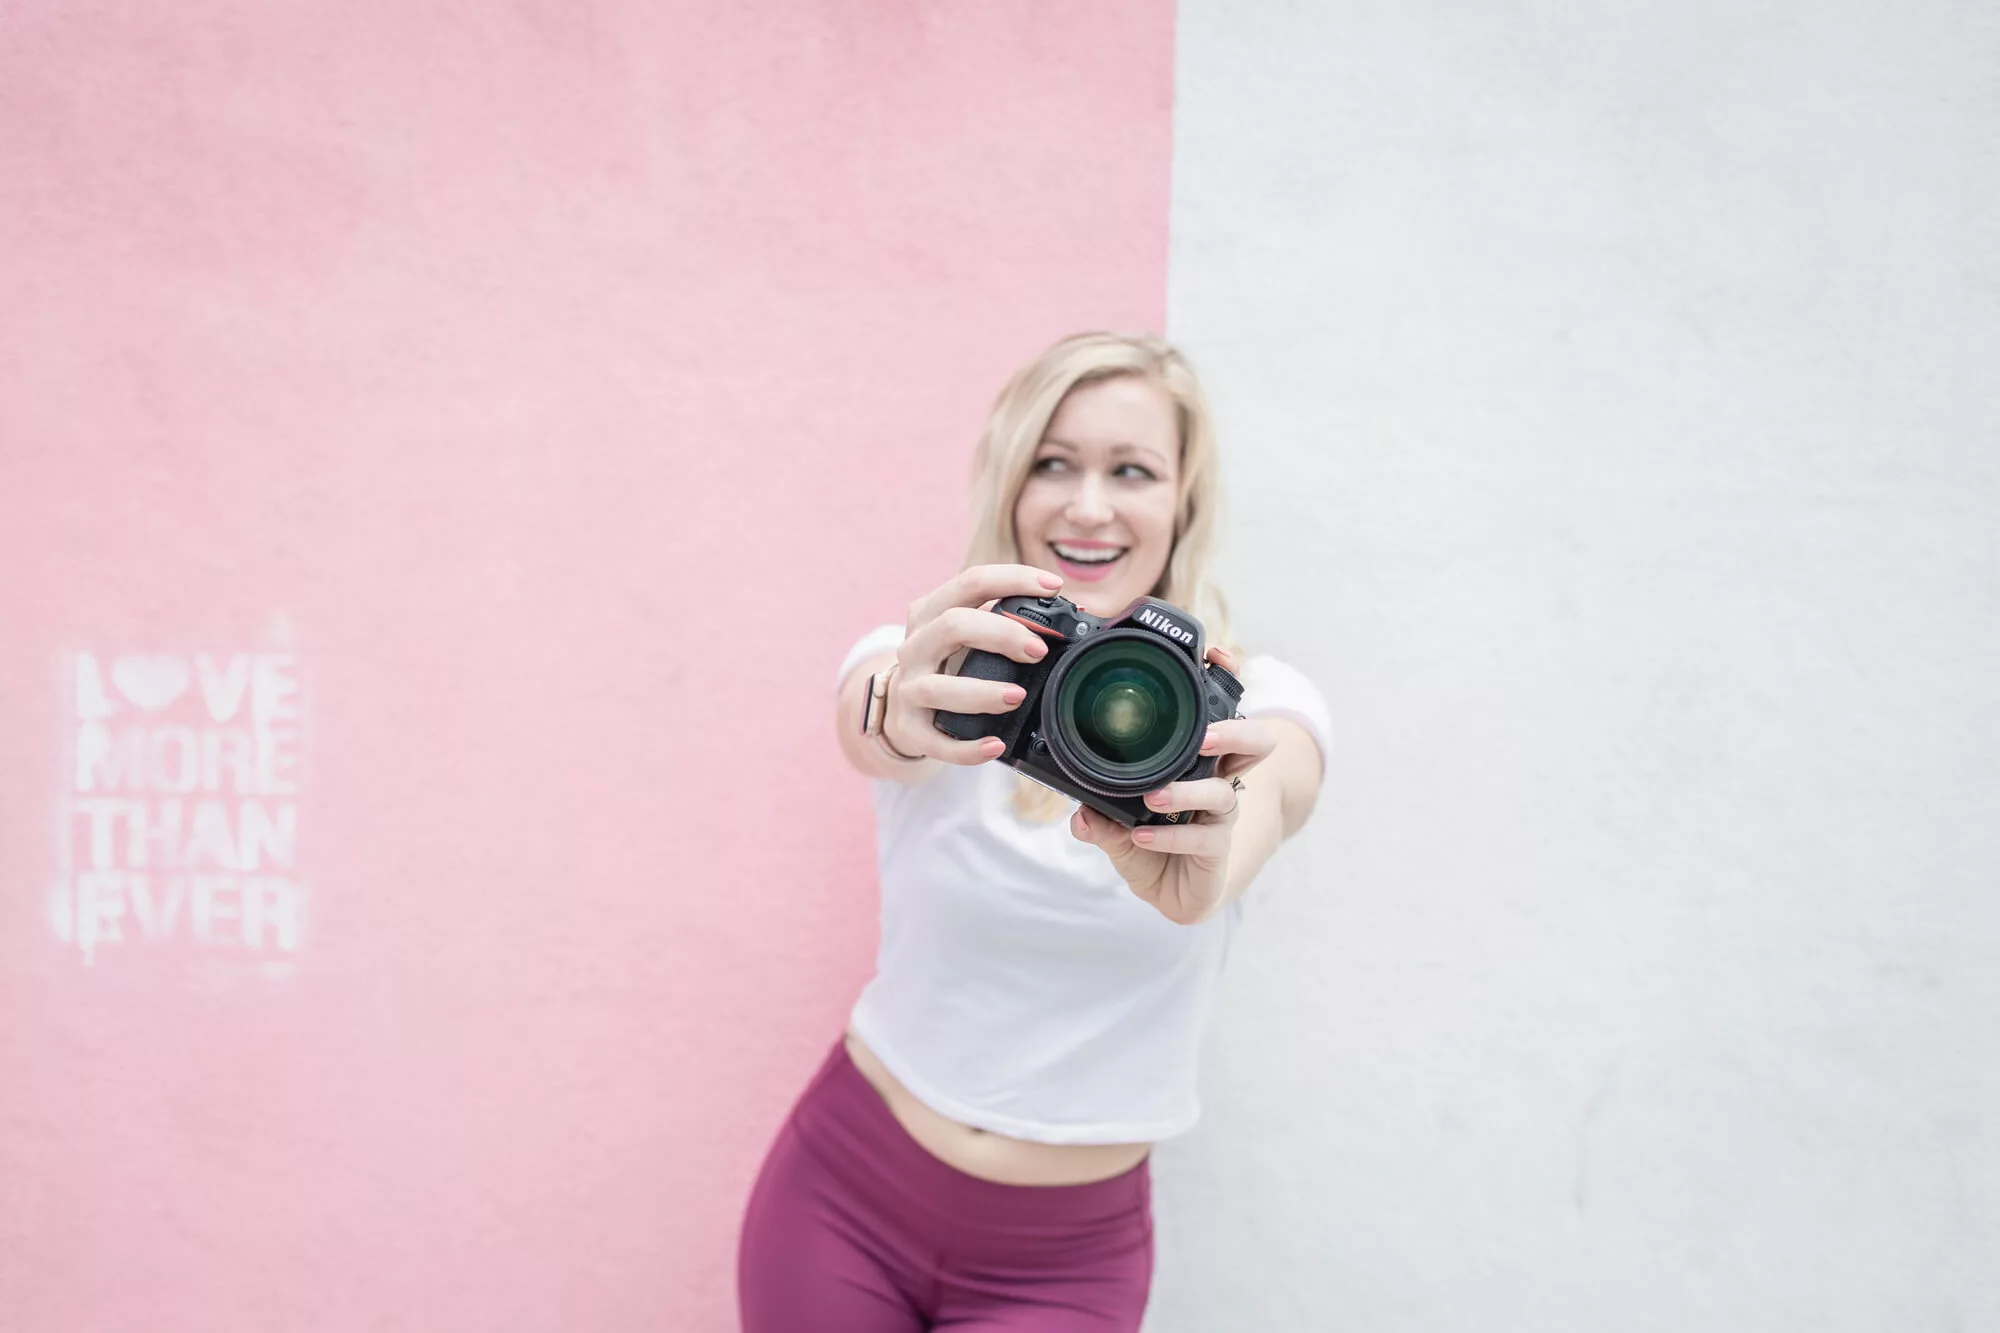 Female Photographer posting against a wall holding our her camera for her branding pictures wondering if she should be tipping her photographer